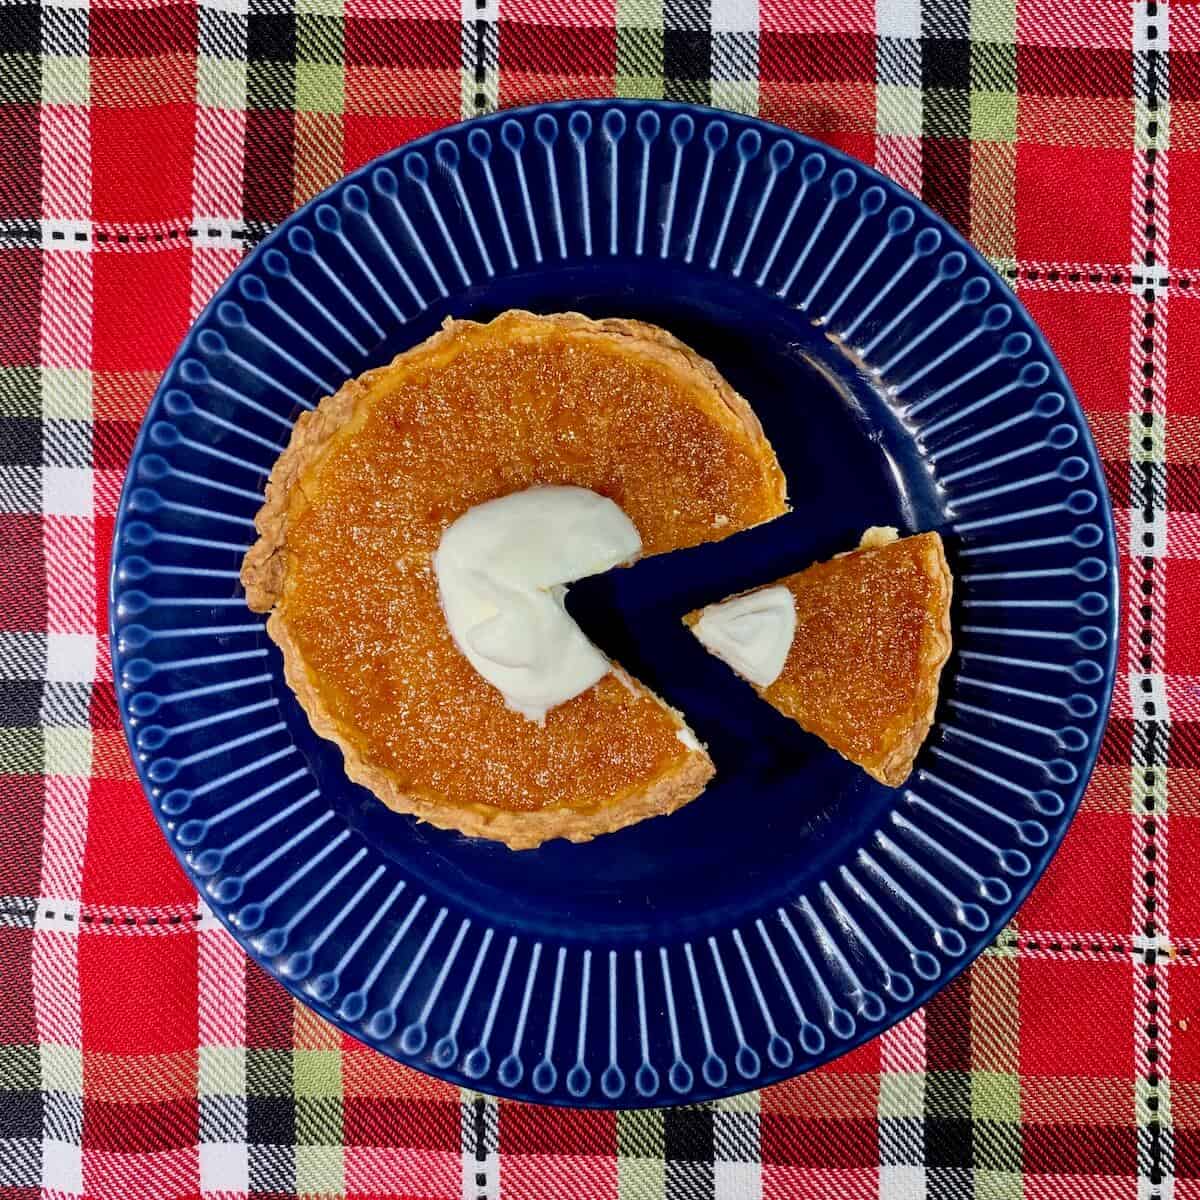 Treacle Tart sliced & plated on a blue plate with a plaid background from overhead.